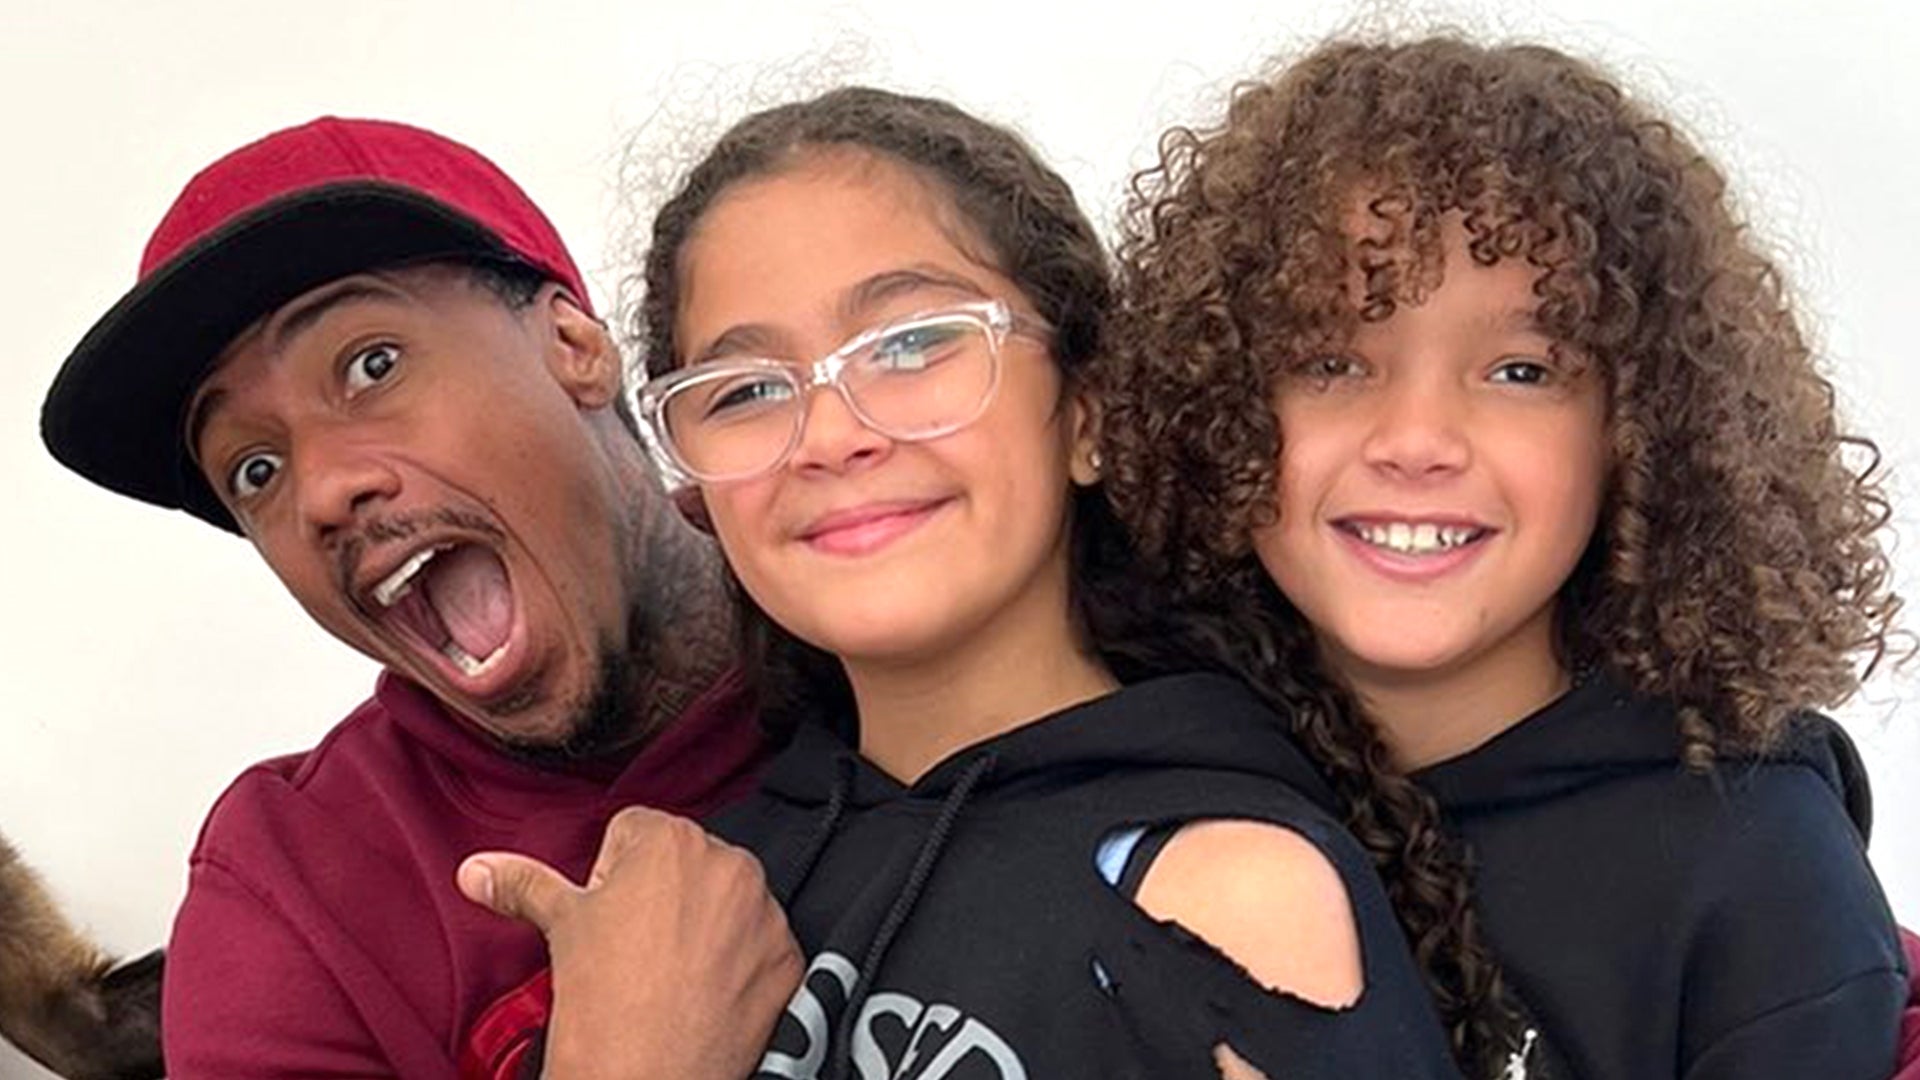 Nick Cannon Teases His Kids Will Star on ‘Wild n’ Out’ (Exclusive)